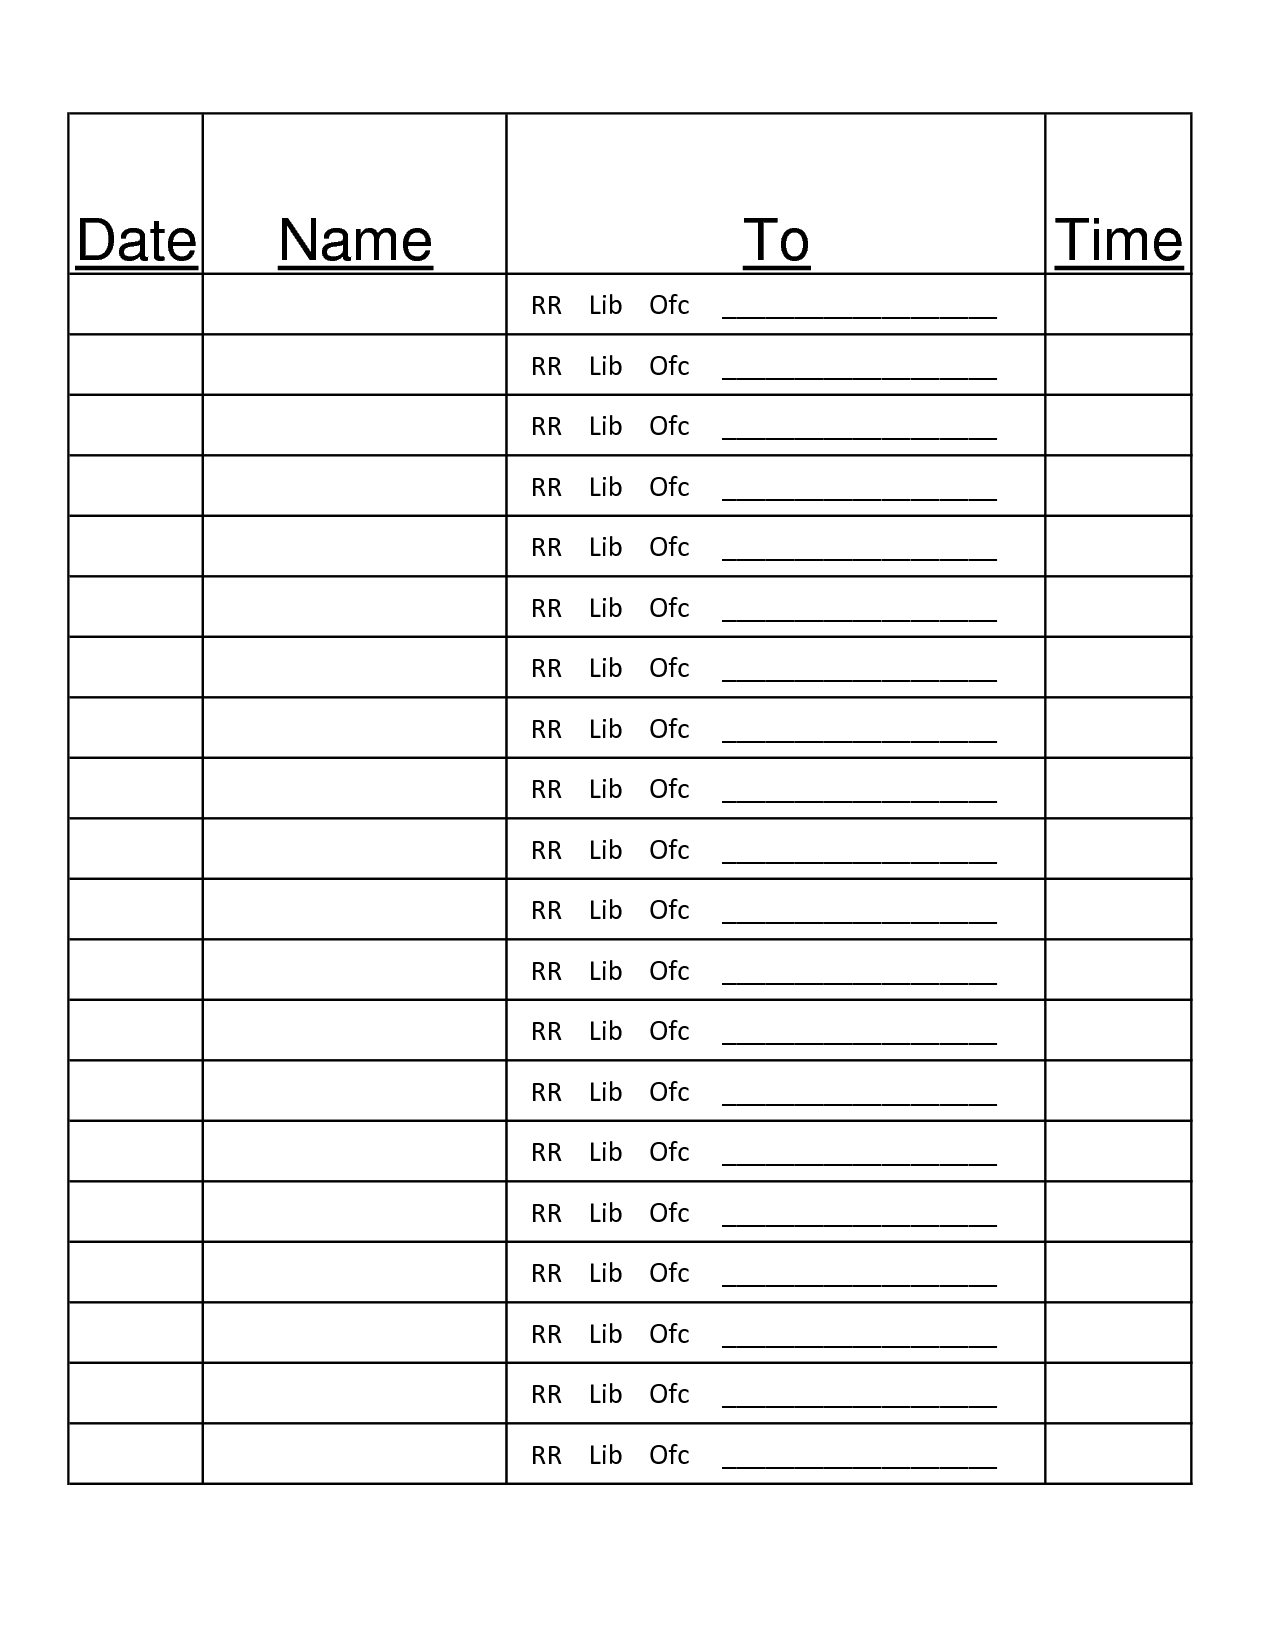 25 Images Of Bathroom Hall Pass Template | Bfegy - Free Printable Hall Pass Template